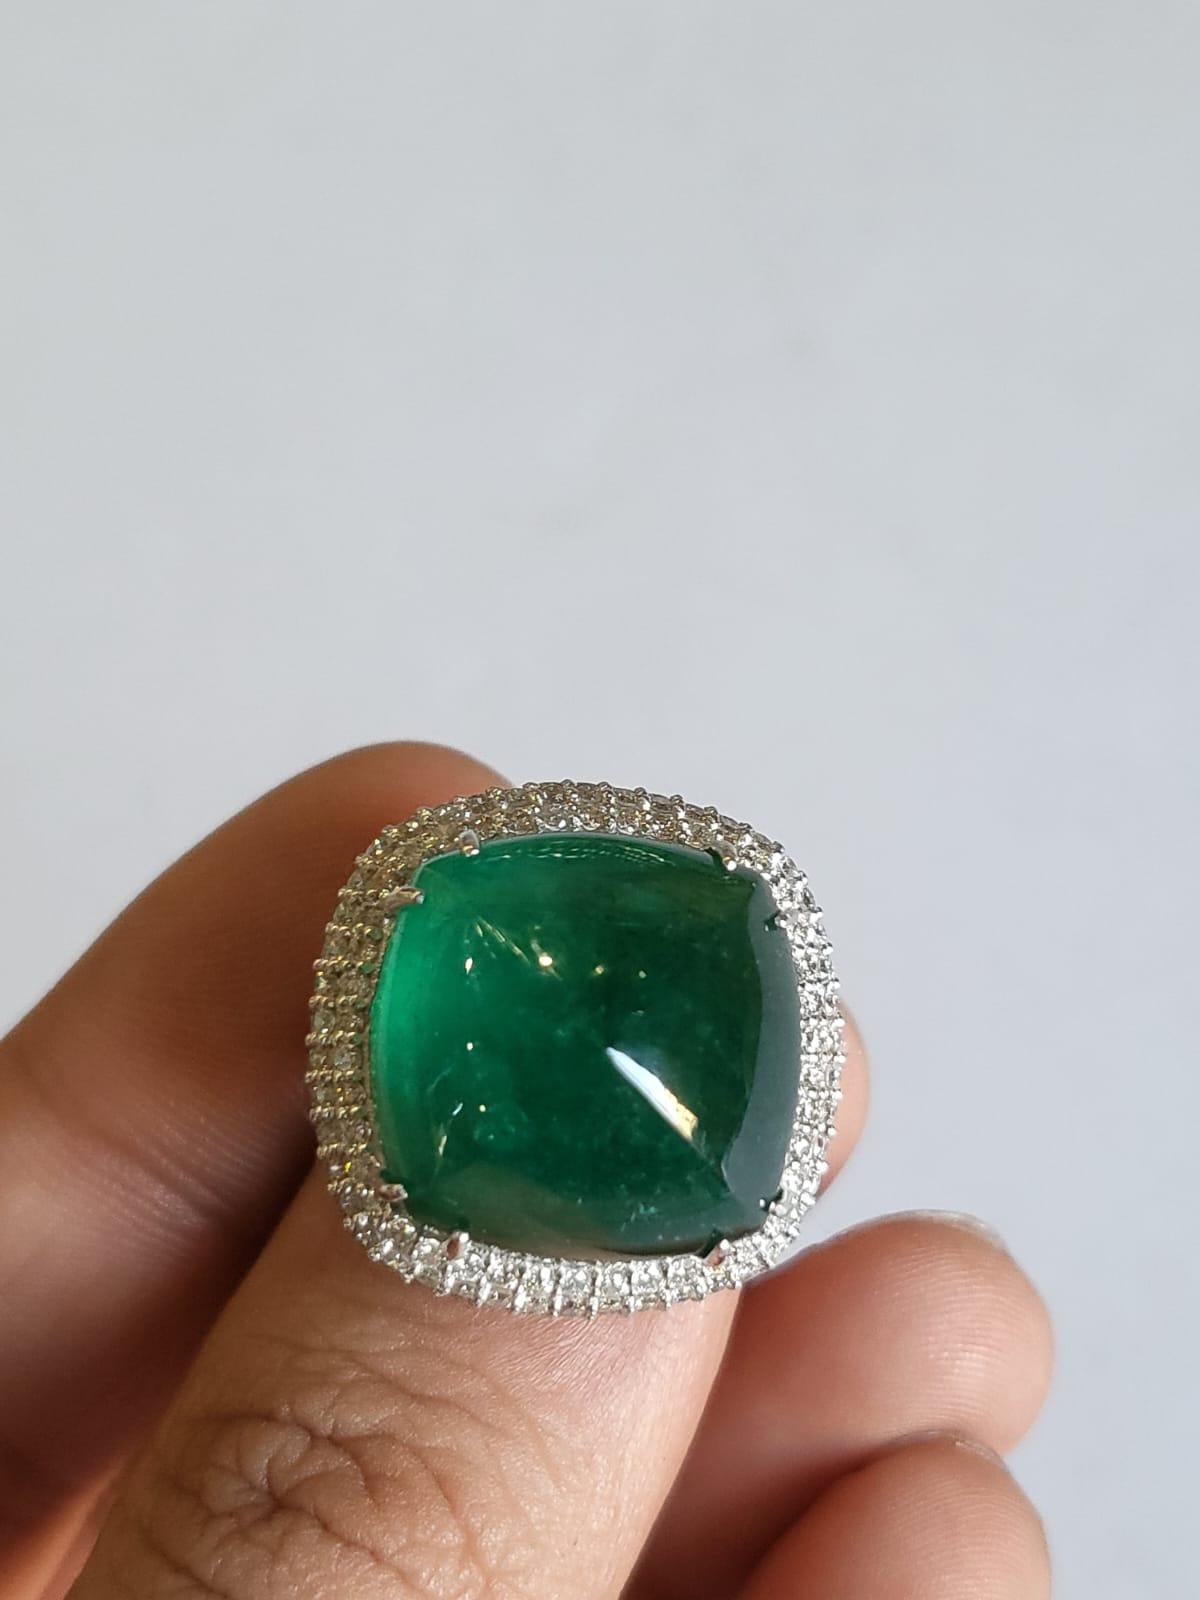 A very gorgeous and one of a kind, Emerald Engagement Ring set in 18K White Gold & Diamonds. The weight of the Emerald sugarloaf is 24.99 carats. The Emerald is completely natural, without any treatment & is of Zambian origin. The Diamonds weight is